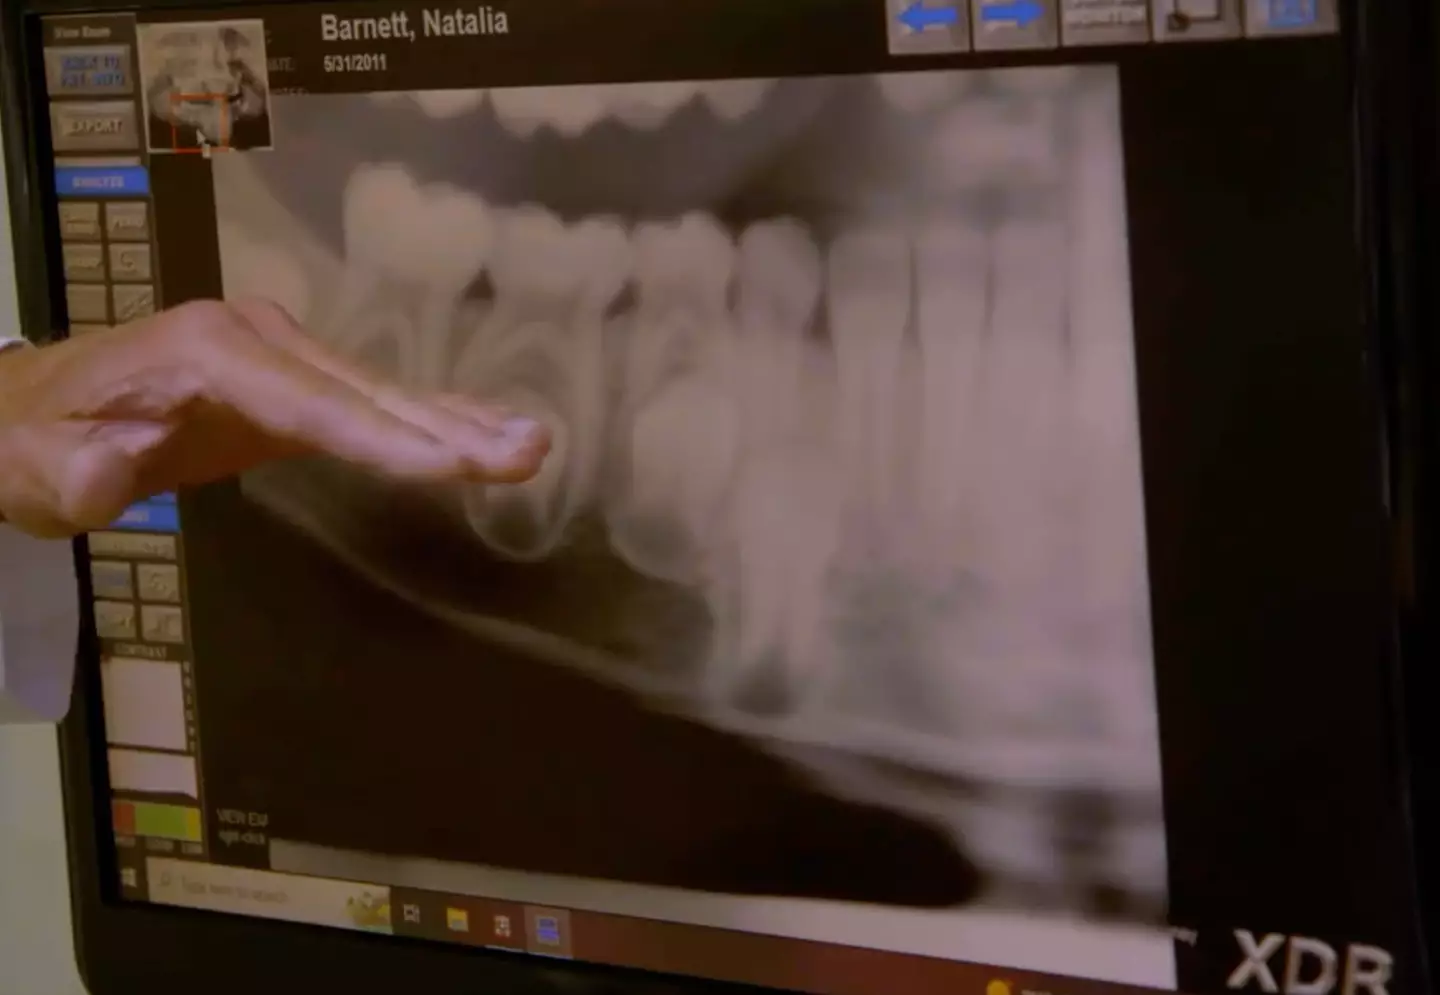 A dentist who x-rayed Natalia Grace said he 'indisputable' evidence showing how old she is.